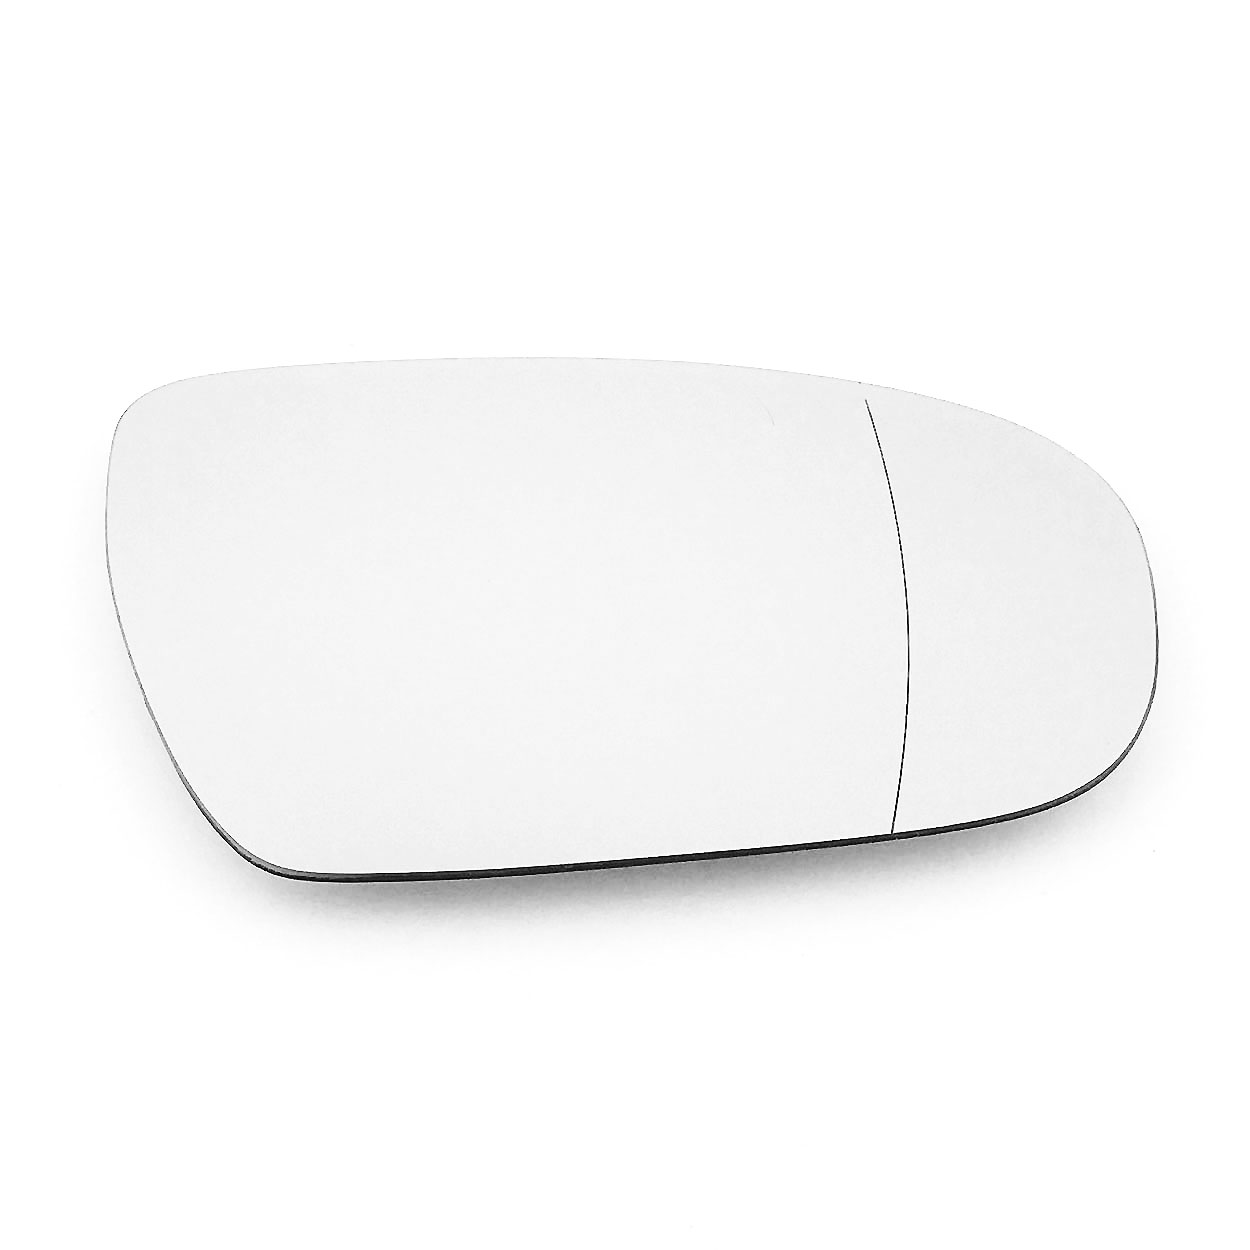 Right Driver side wing mirror glass for Hyundai ix20 2010-On heated